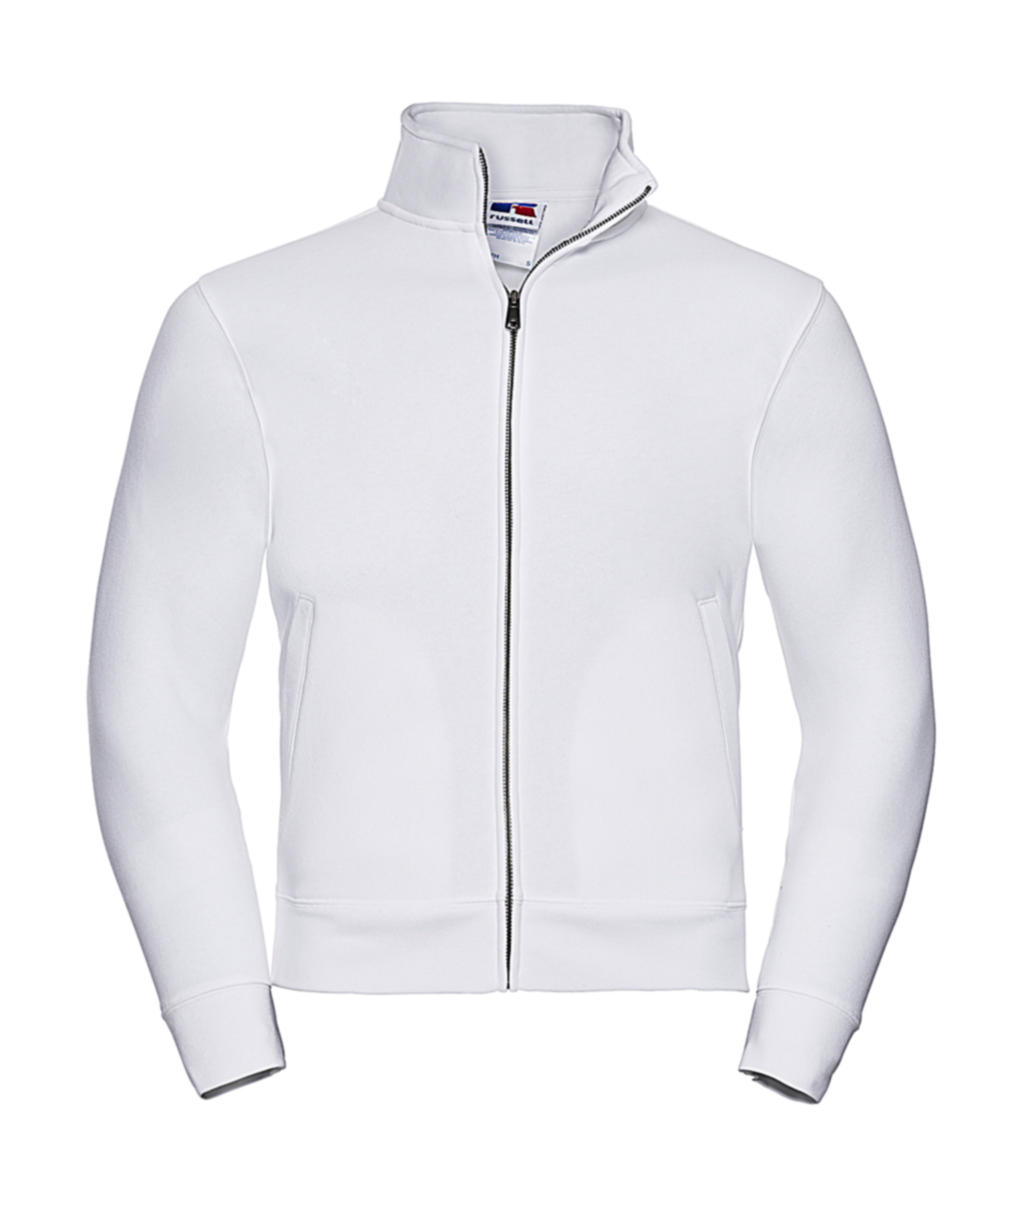  Mens Authentic Sweat Jacket in Farbe White